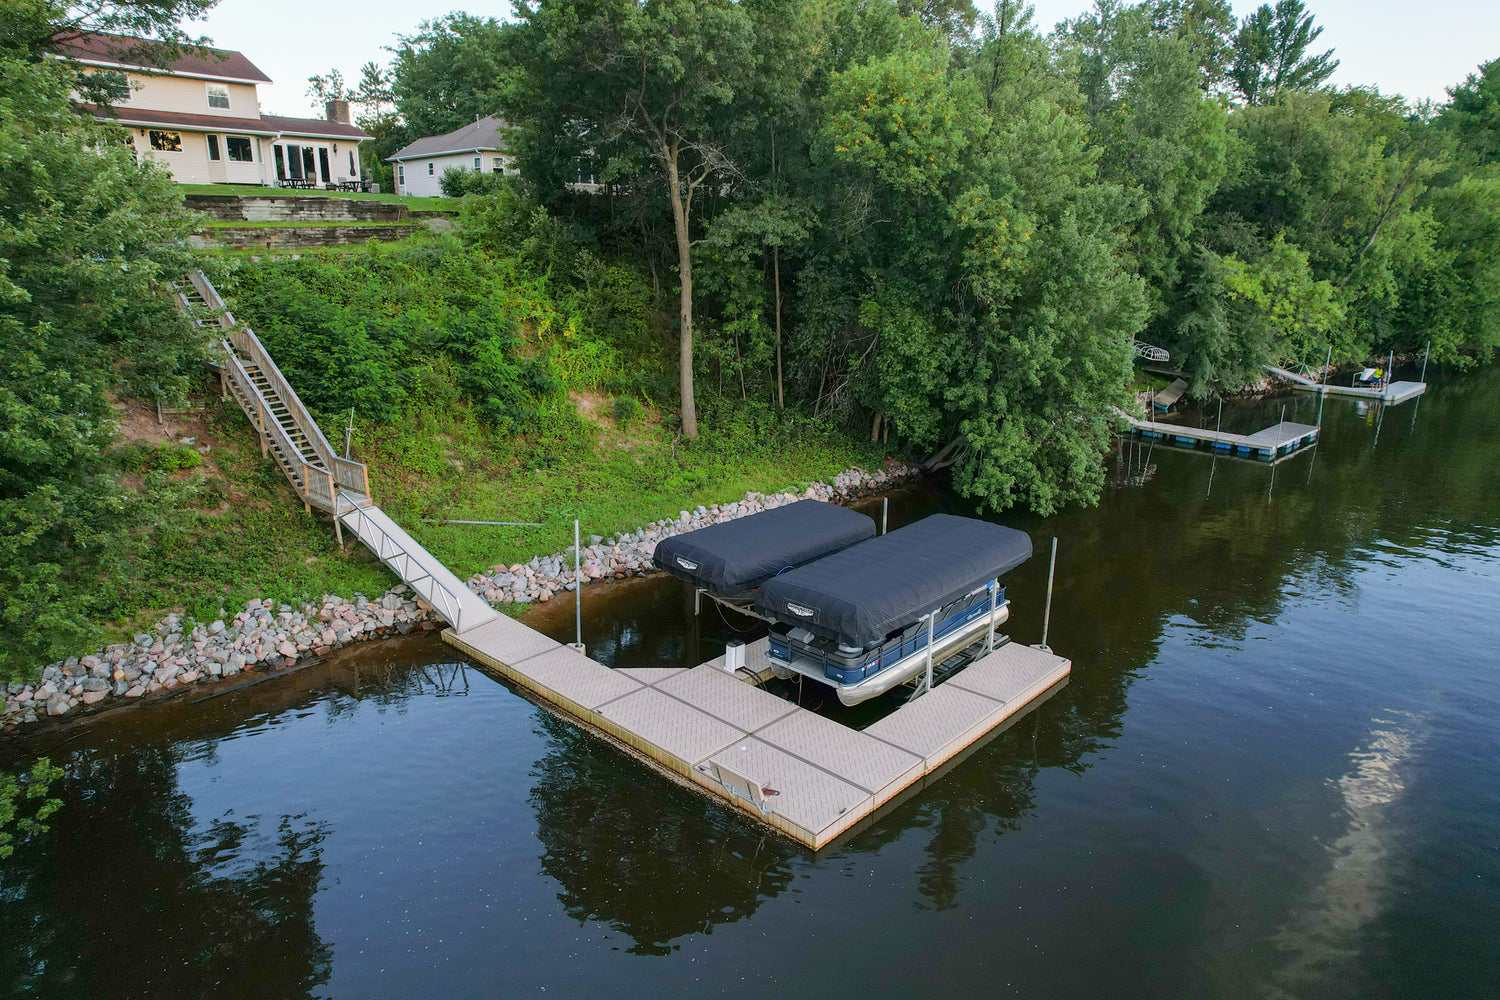 Docks and Lifts from PolyDock & Shoremaster in Sylvan Lake. Contact us about our waterfront system installation services.